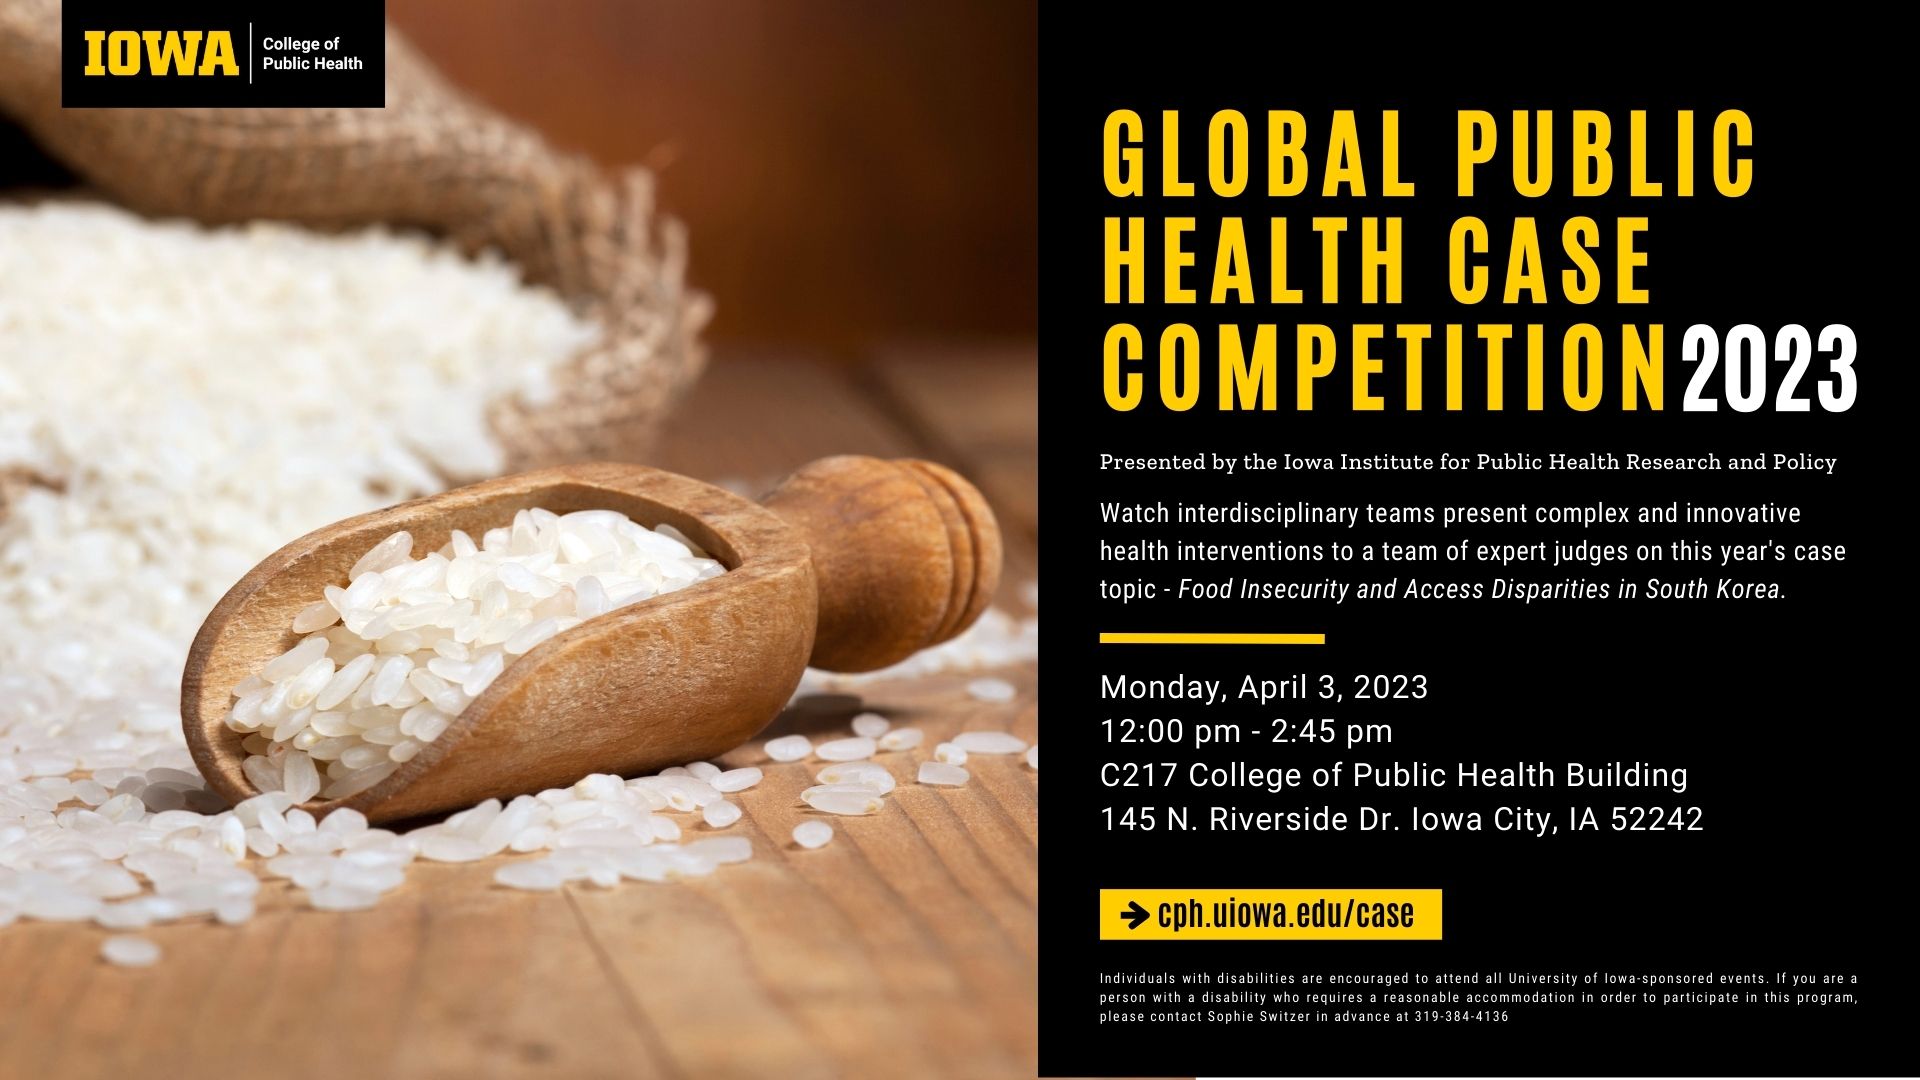 2023 Global Public Health Case Competition is April 3 from noon to 2:45 pm in C217 CPHB